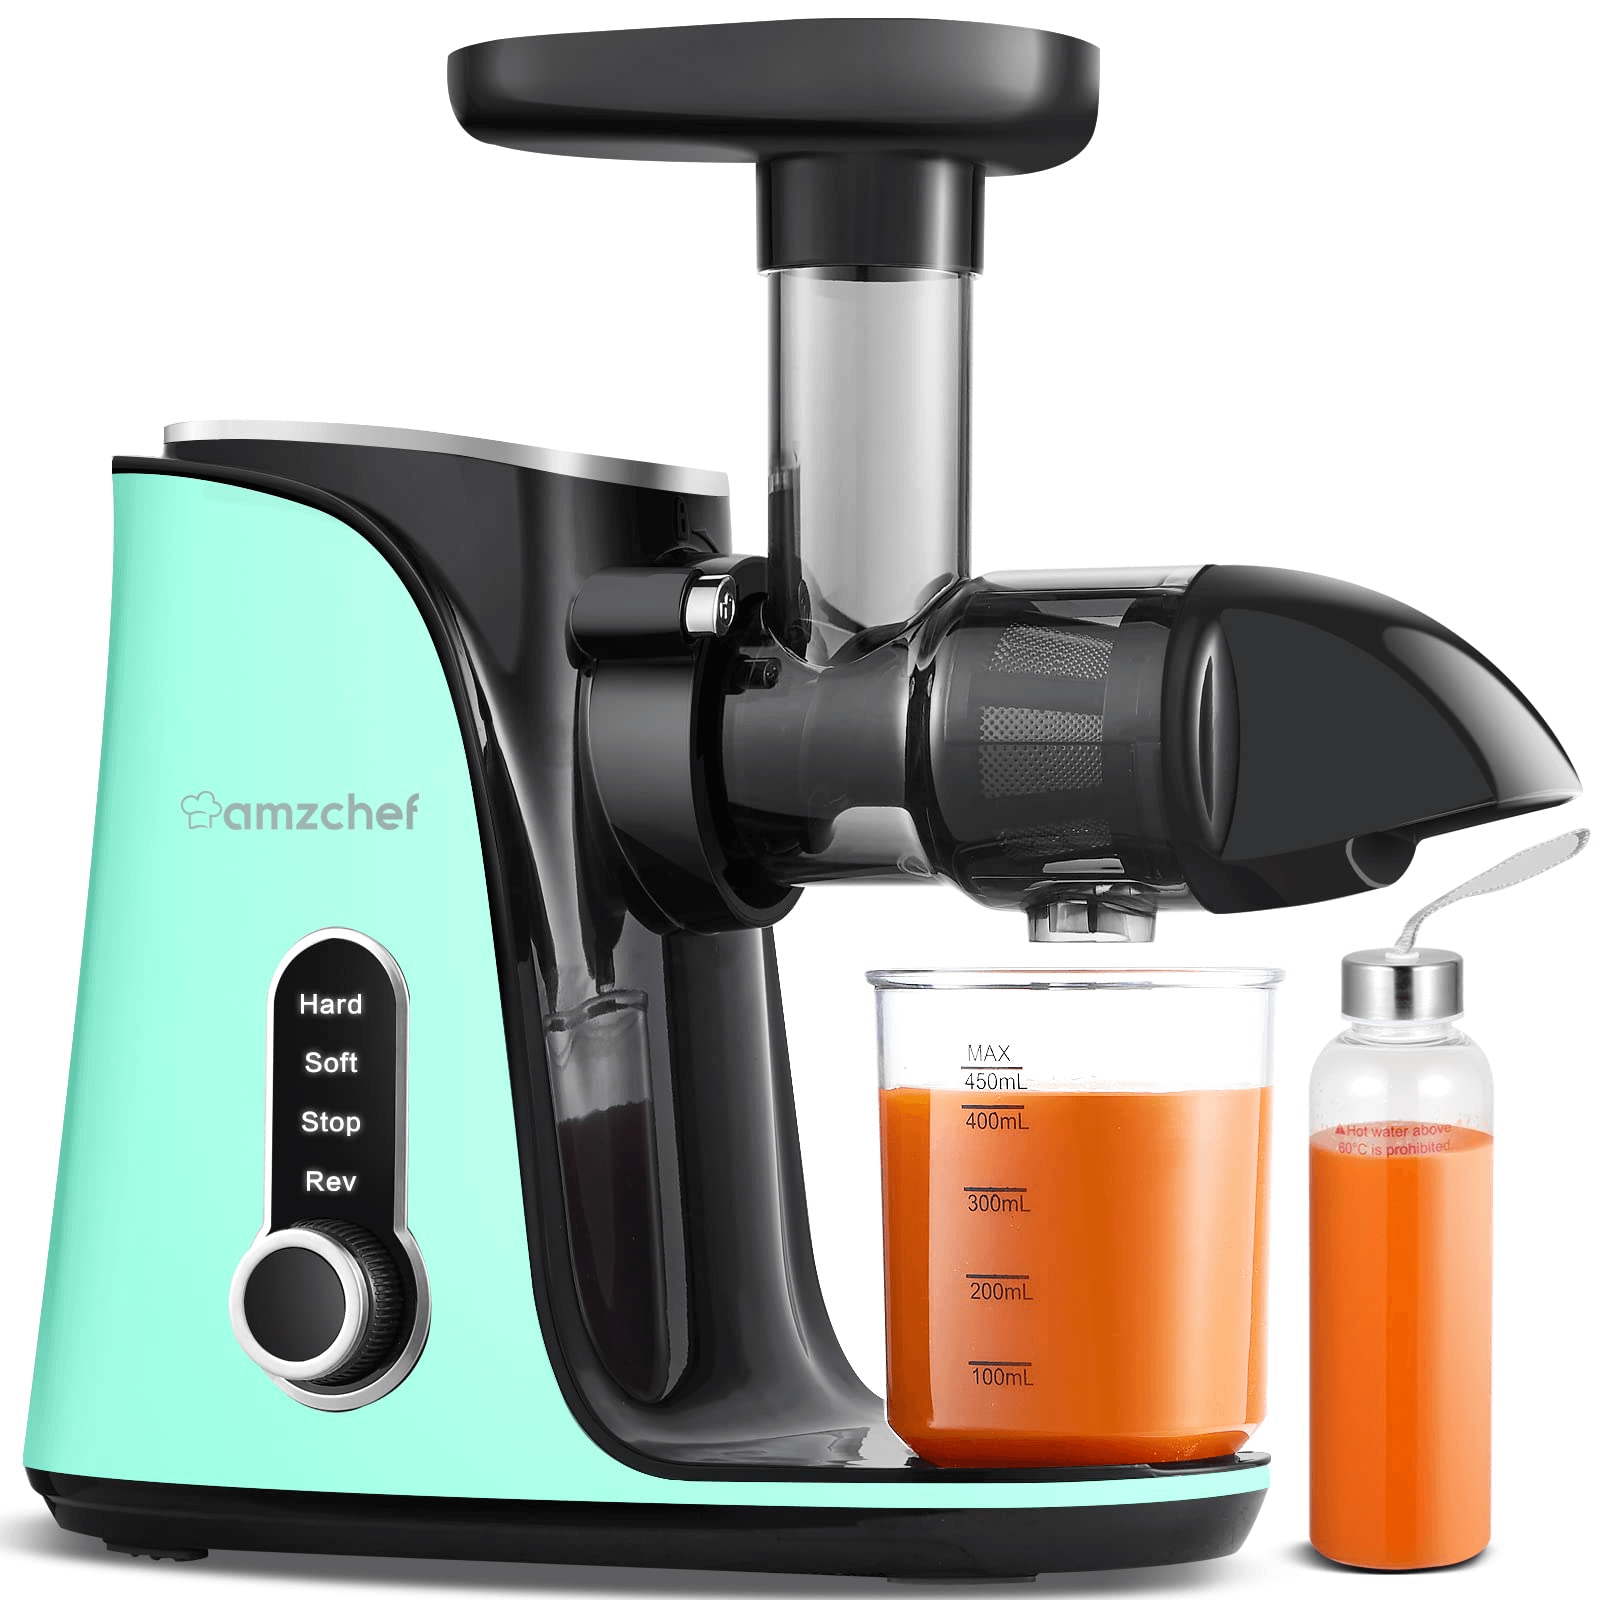 https://cdn.shopify.com/s/files/1/0592/2517/8292/products/AMZCHEF_Slow_Juicer_for_Fruit_and_Vegetables_Powerful_Juicer_GM3001_Green_1.png?v=1676601048&width=1600